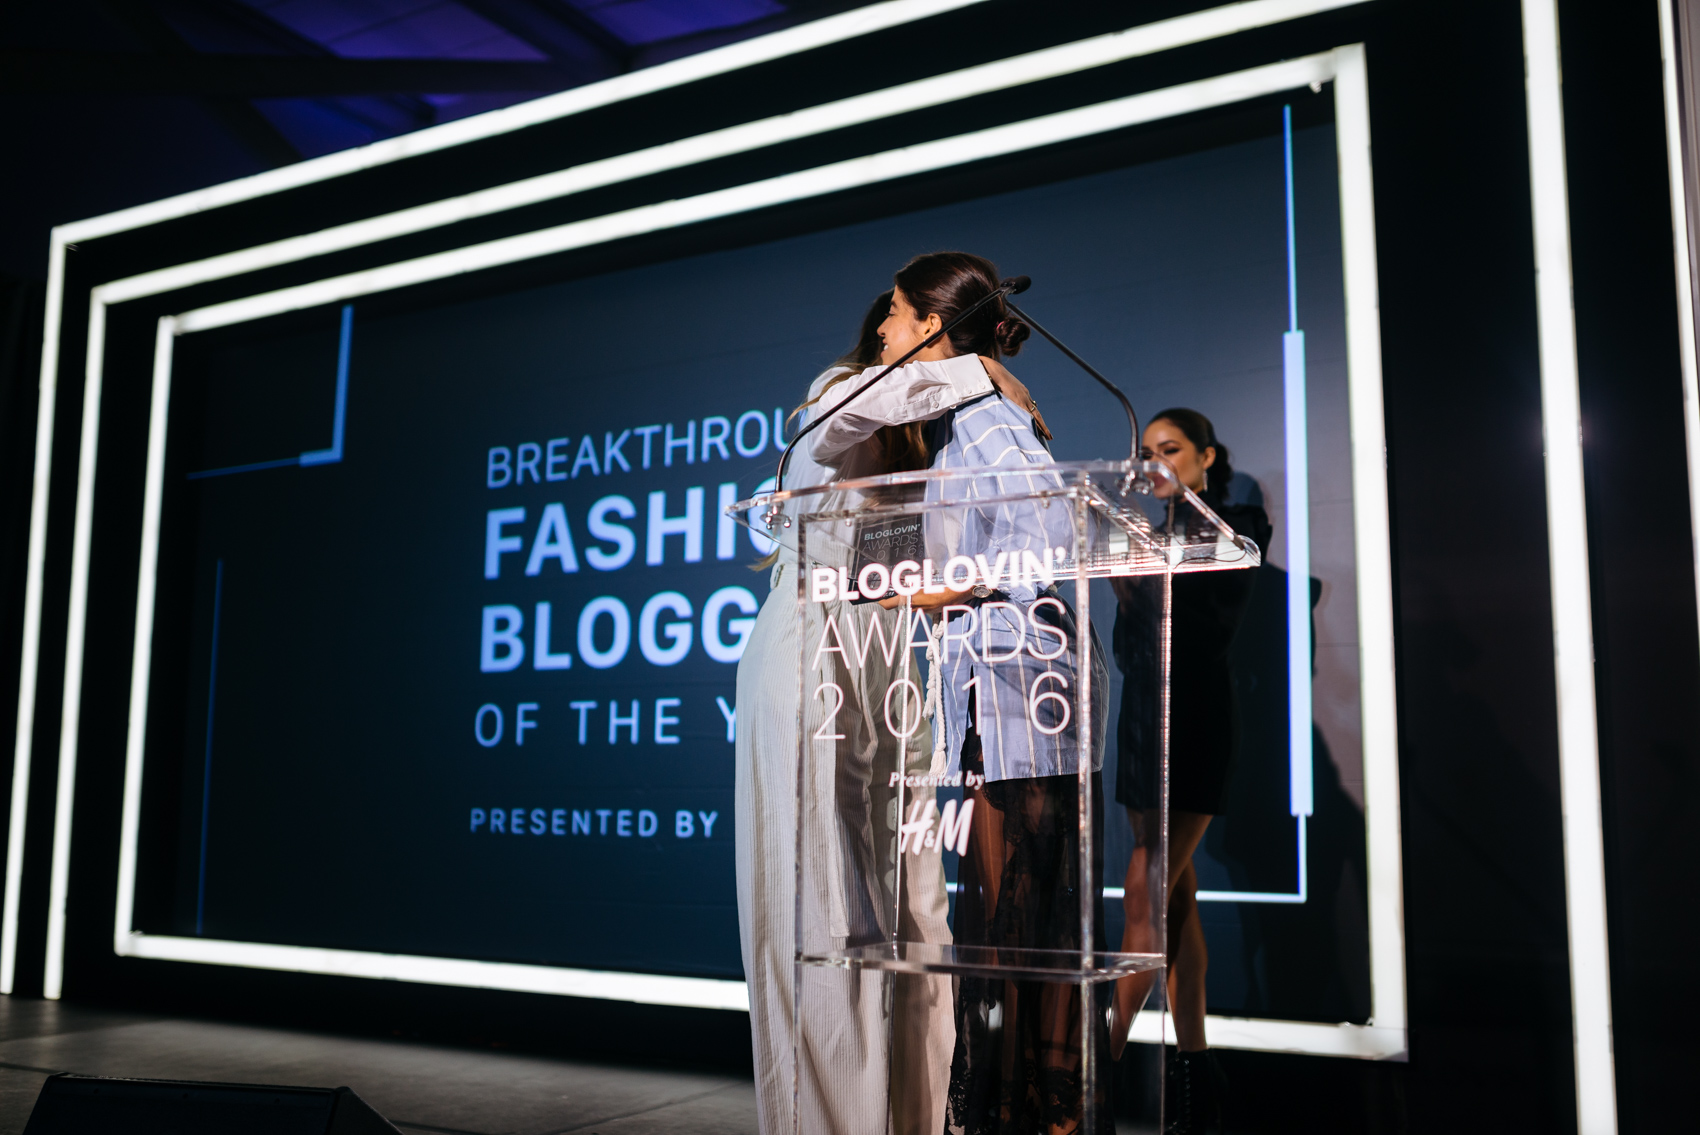 Maristella accepts the award as Breakthrough Fashion Blogger of the Year from Leandra Medine of Man Repeller